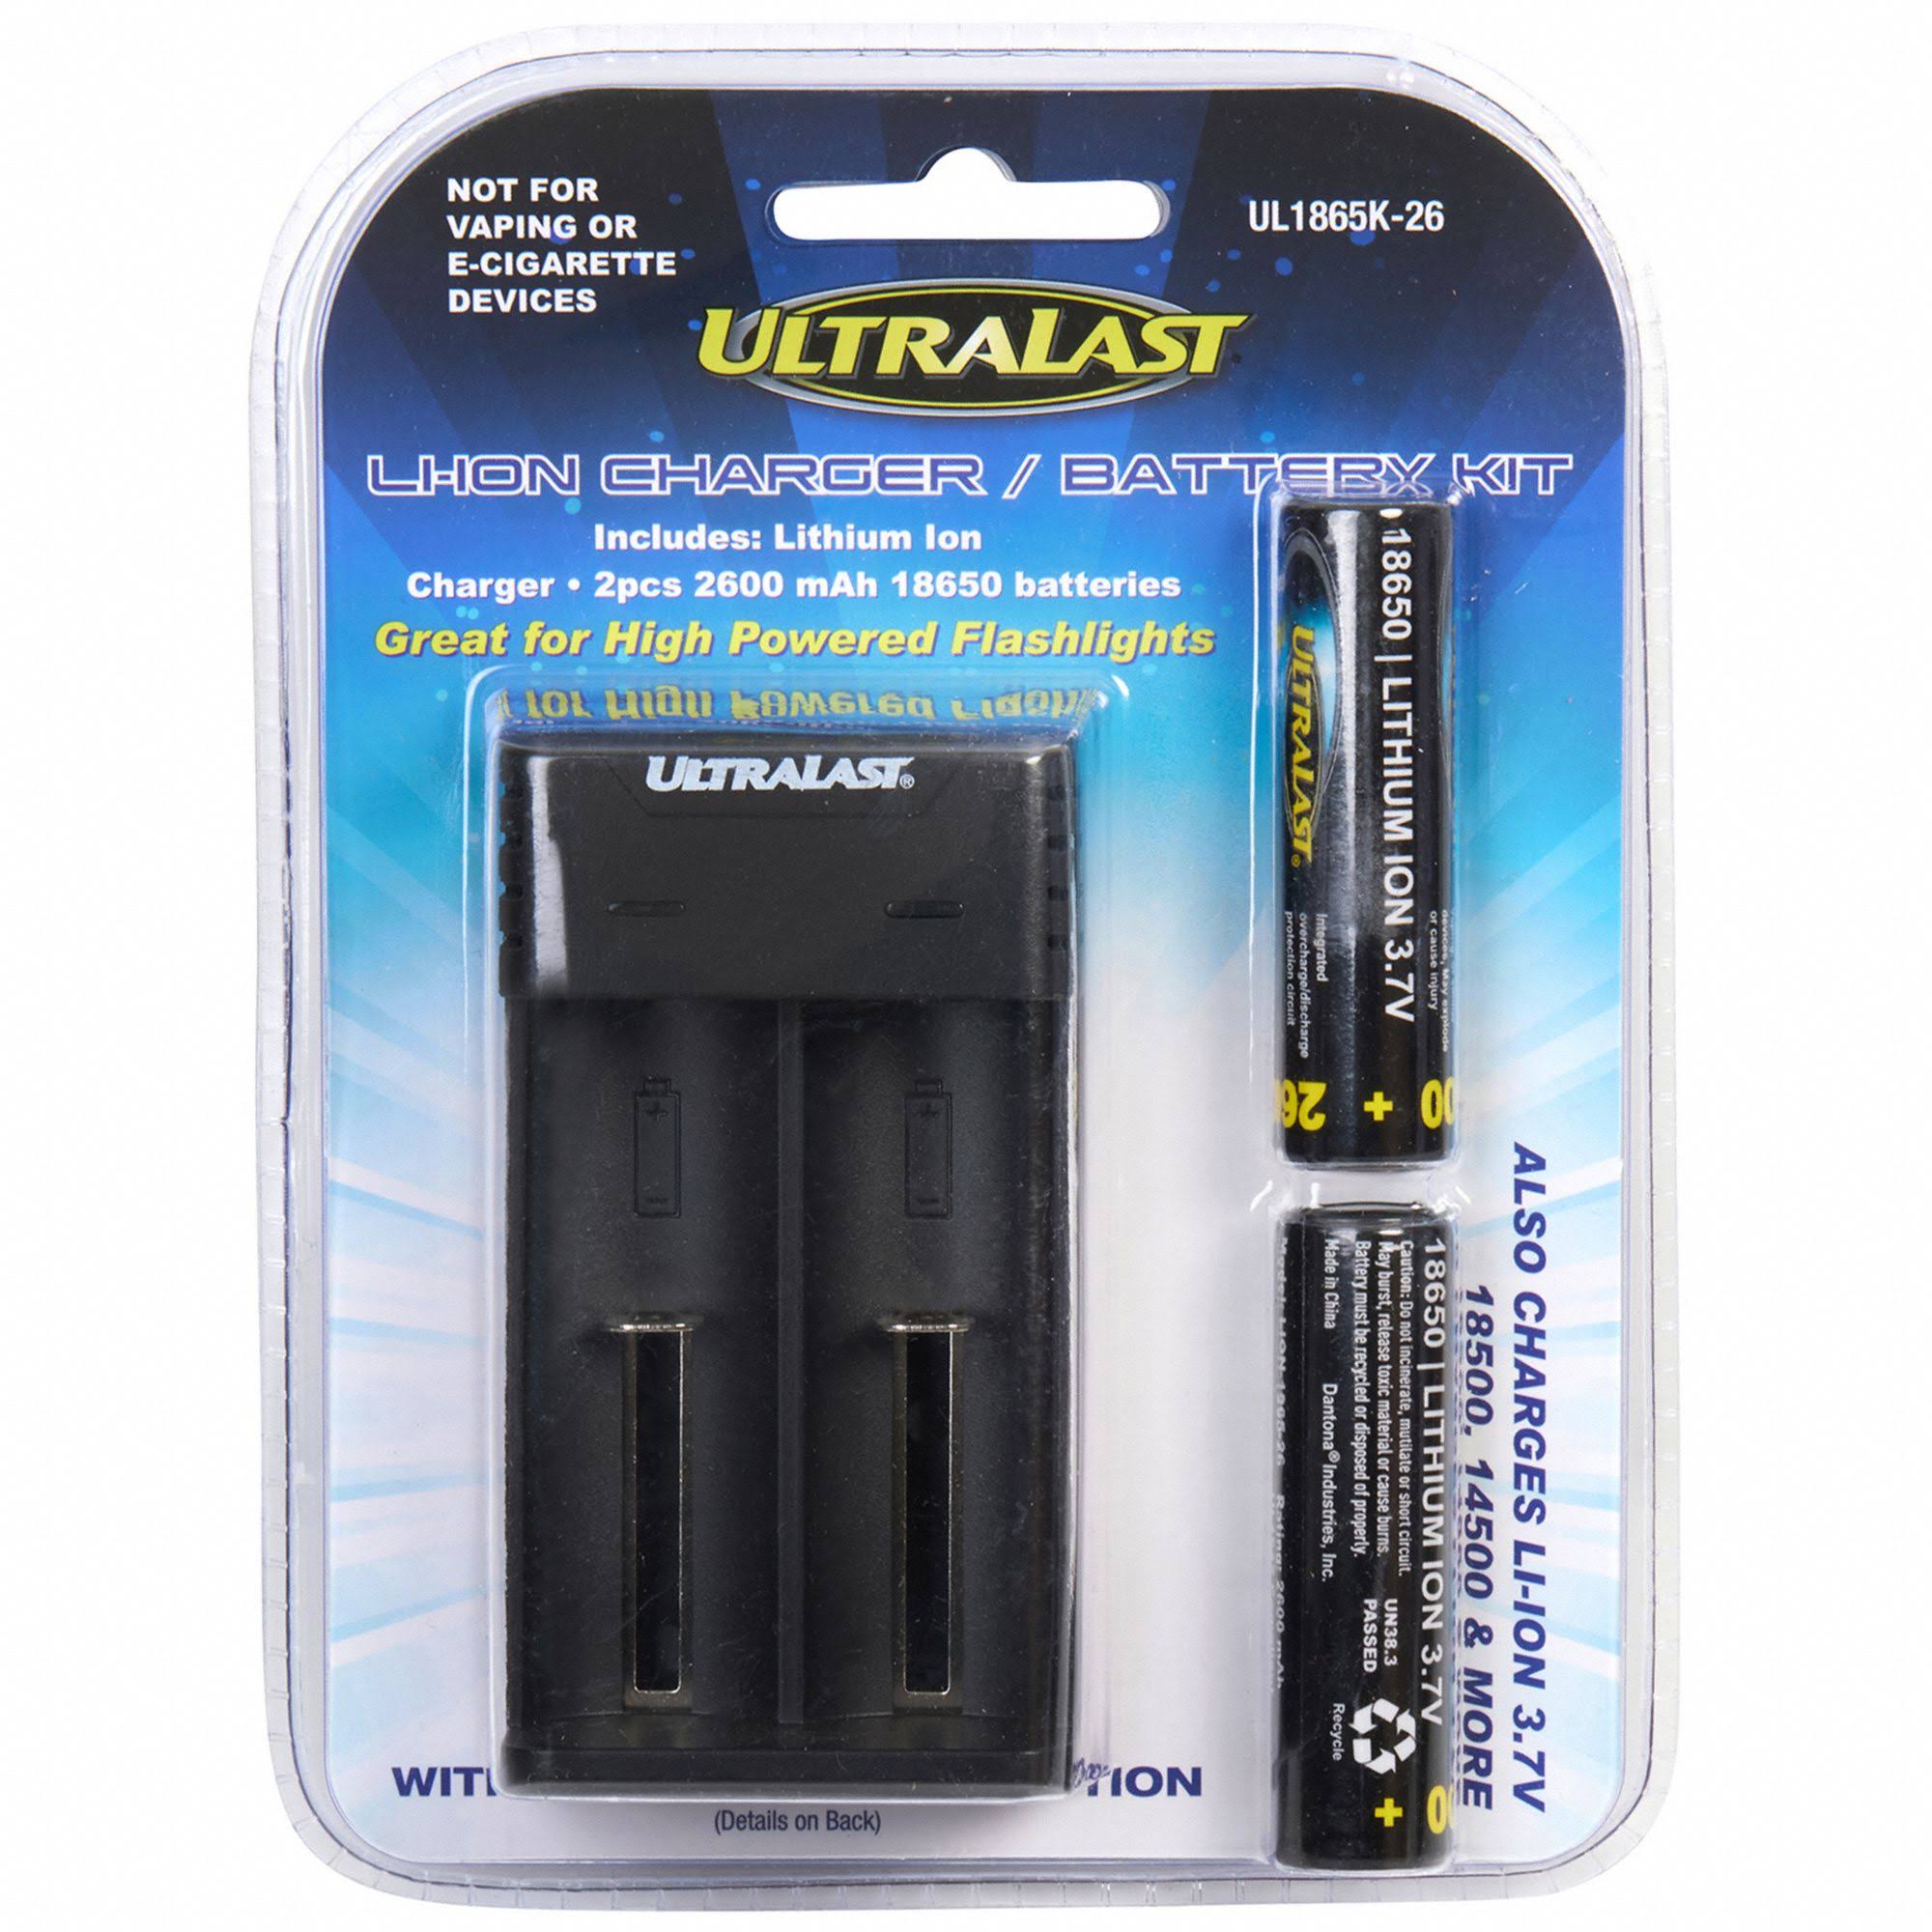 Ultralast Rechargeable Batteries and Charger Set Lithium Ion 18650 3.7 V 2.6 Ah UL1865K-26